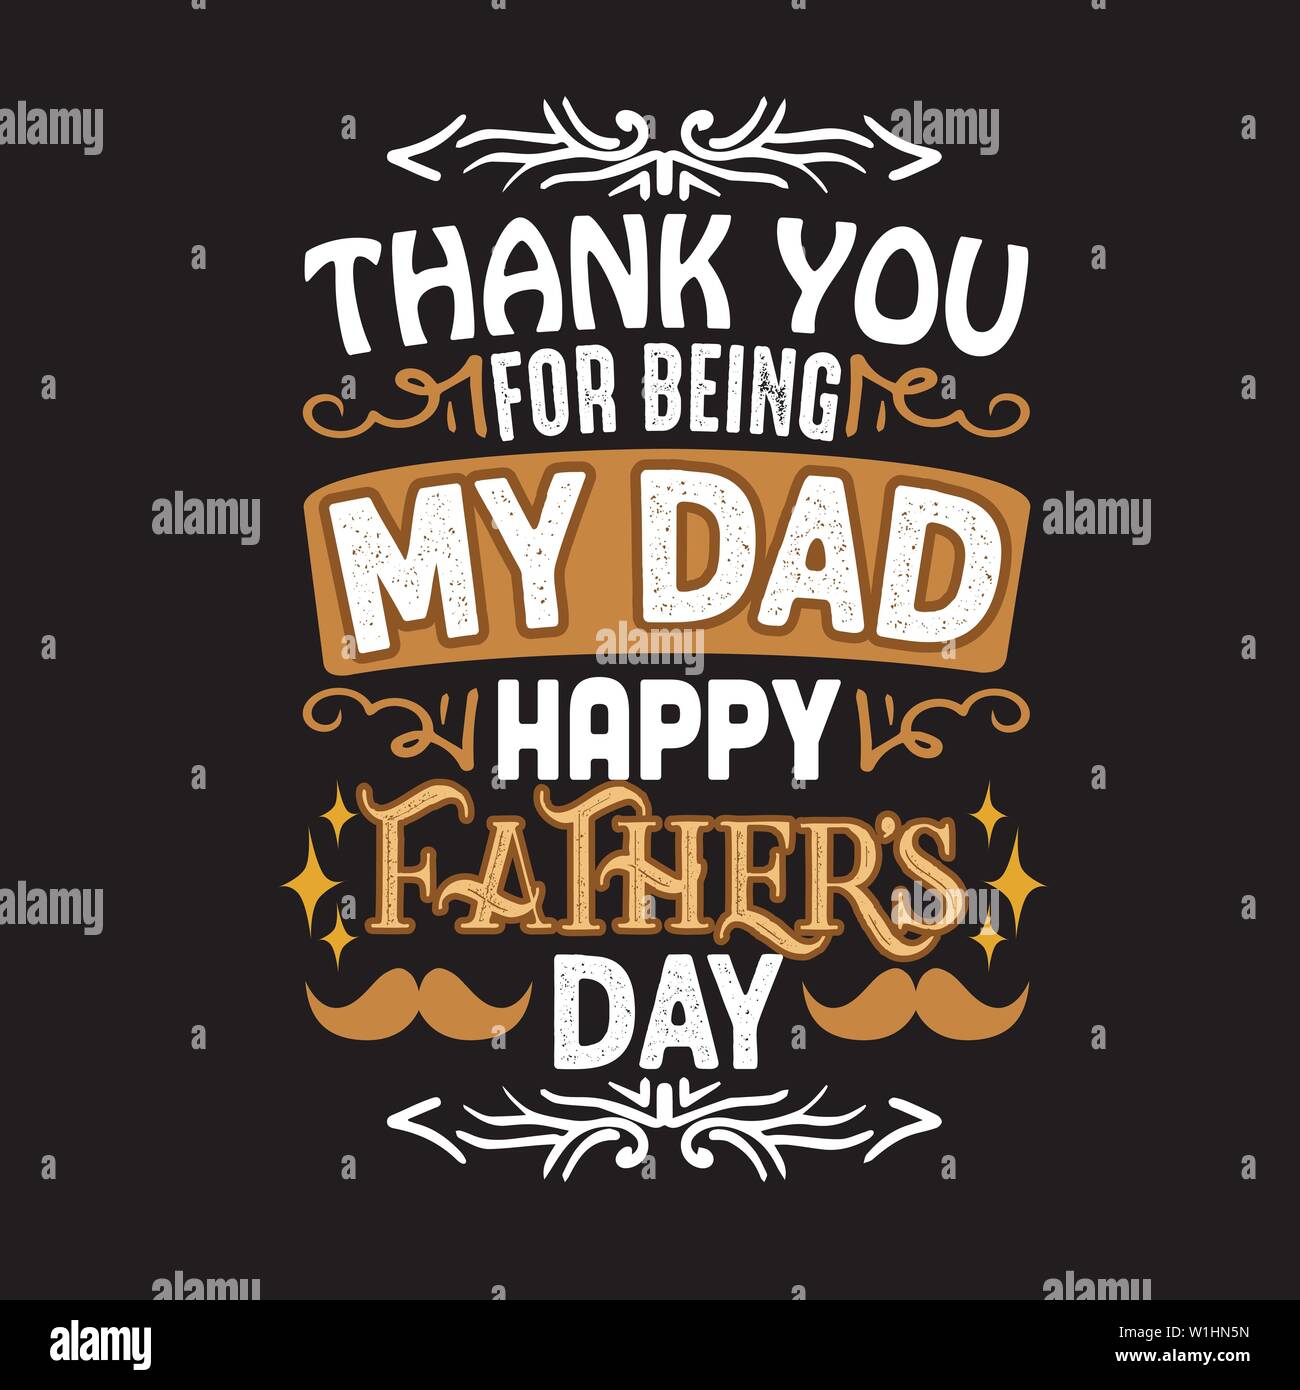 Father Day Quote and Saying. Thank you for being My Dad Happy ...